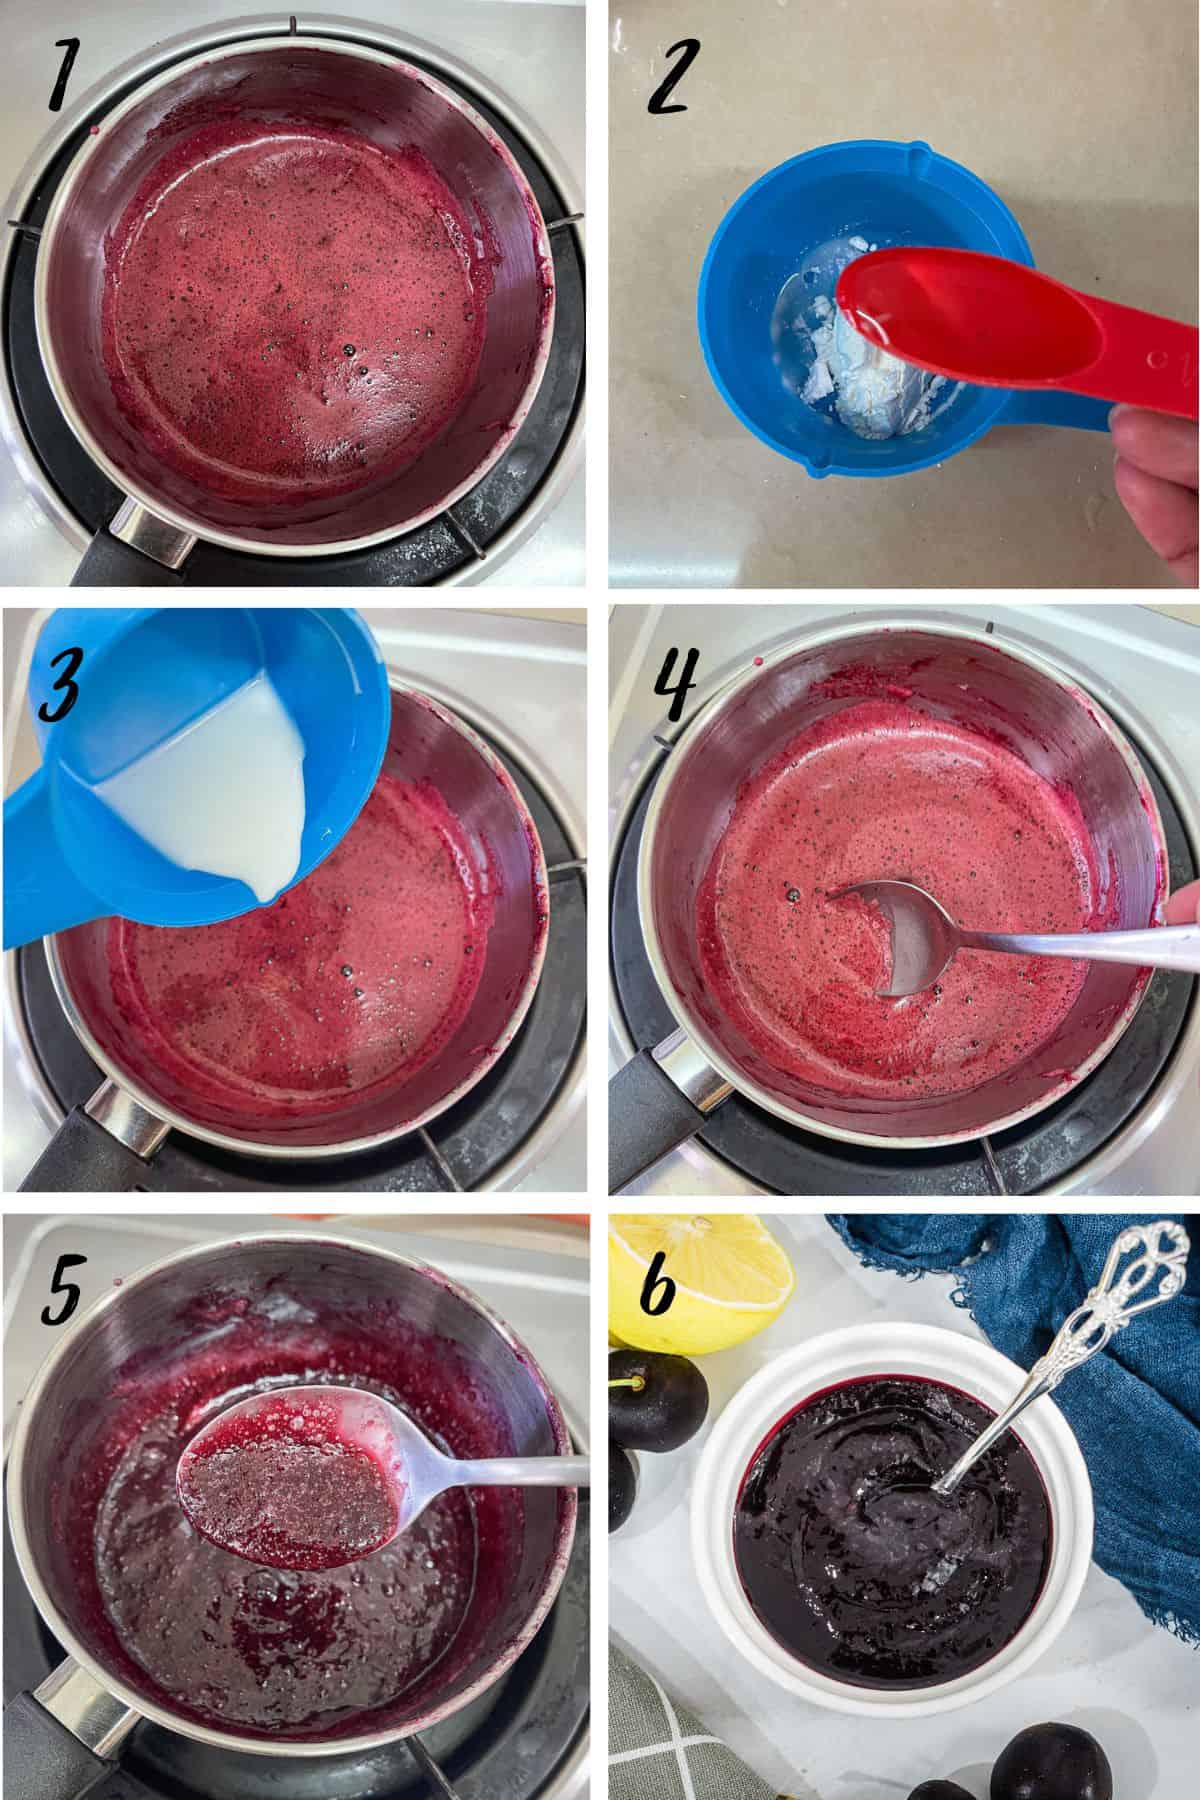 A poster of 6 images showing how to cook cherry sauce to make coulis.